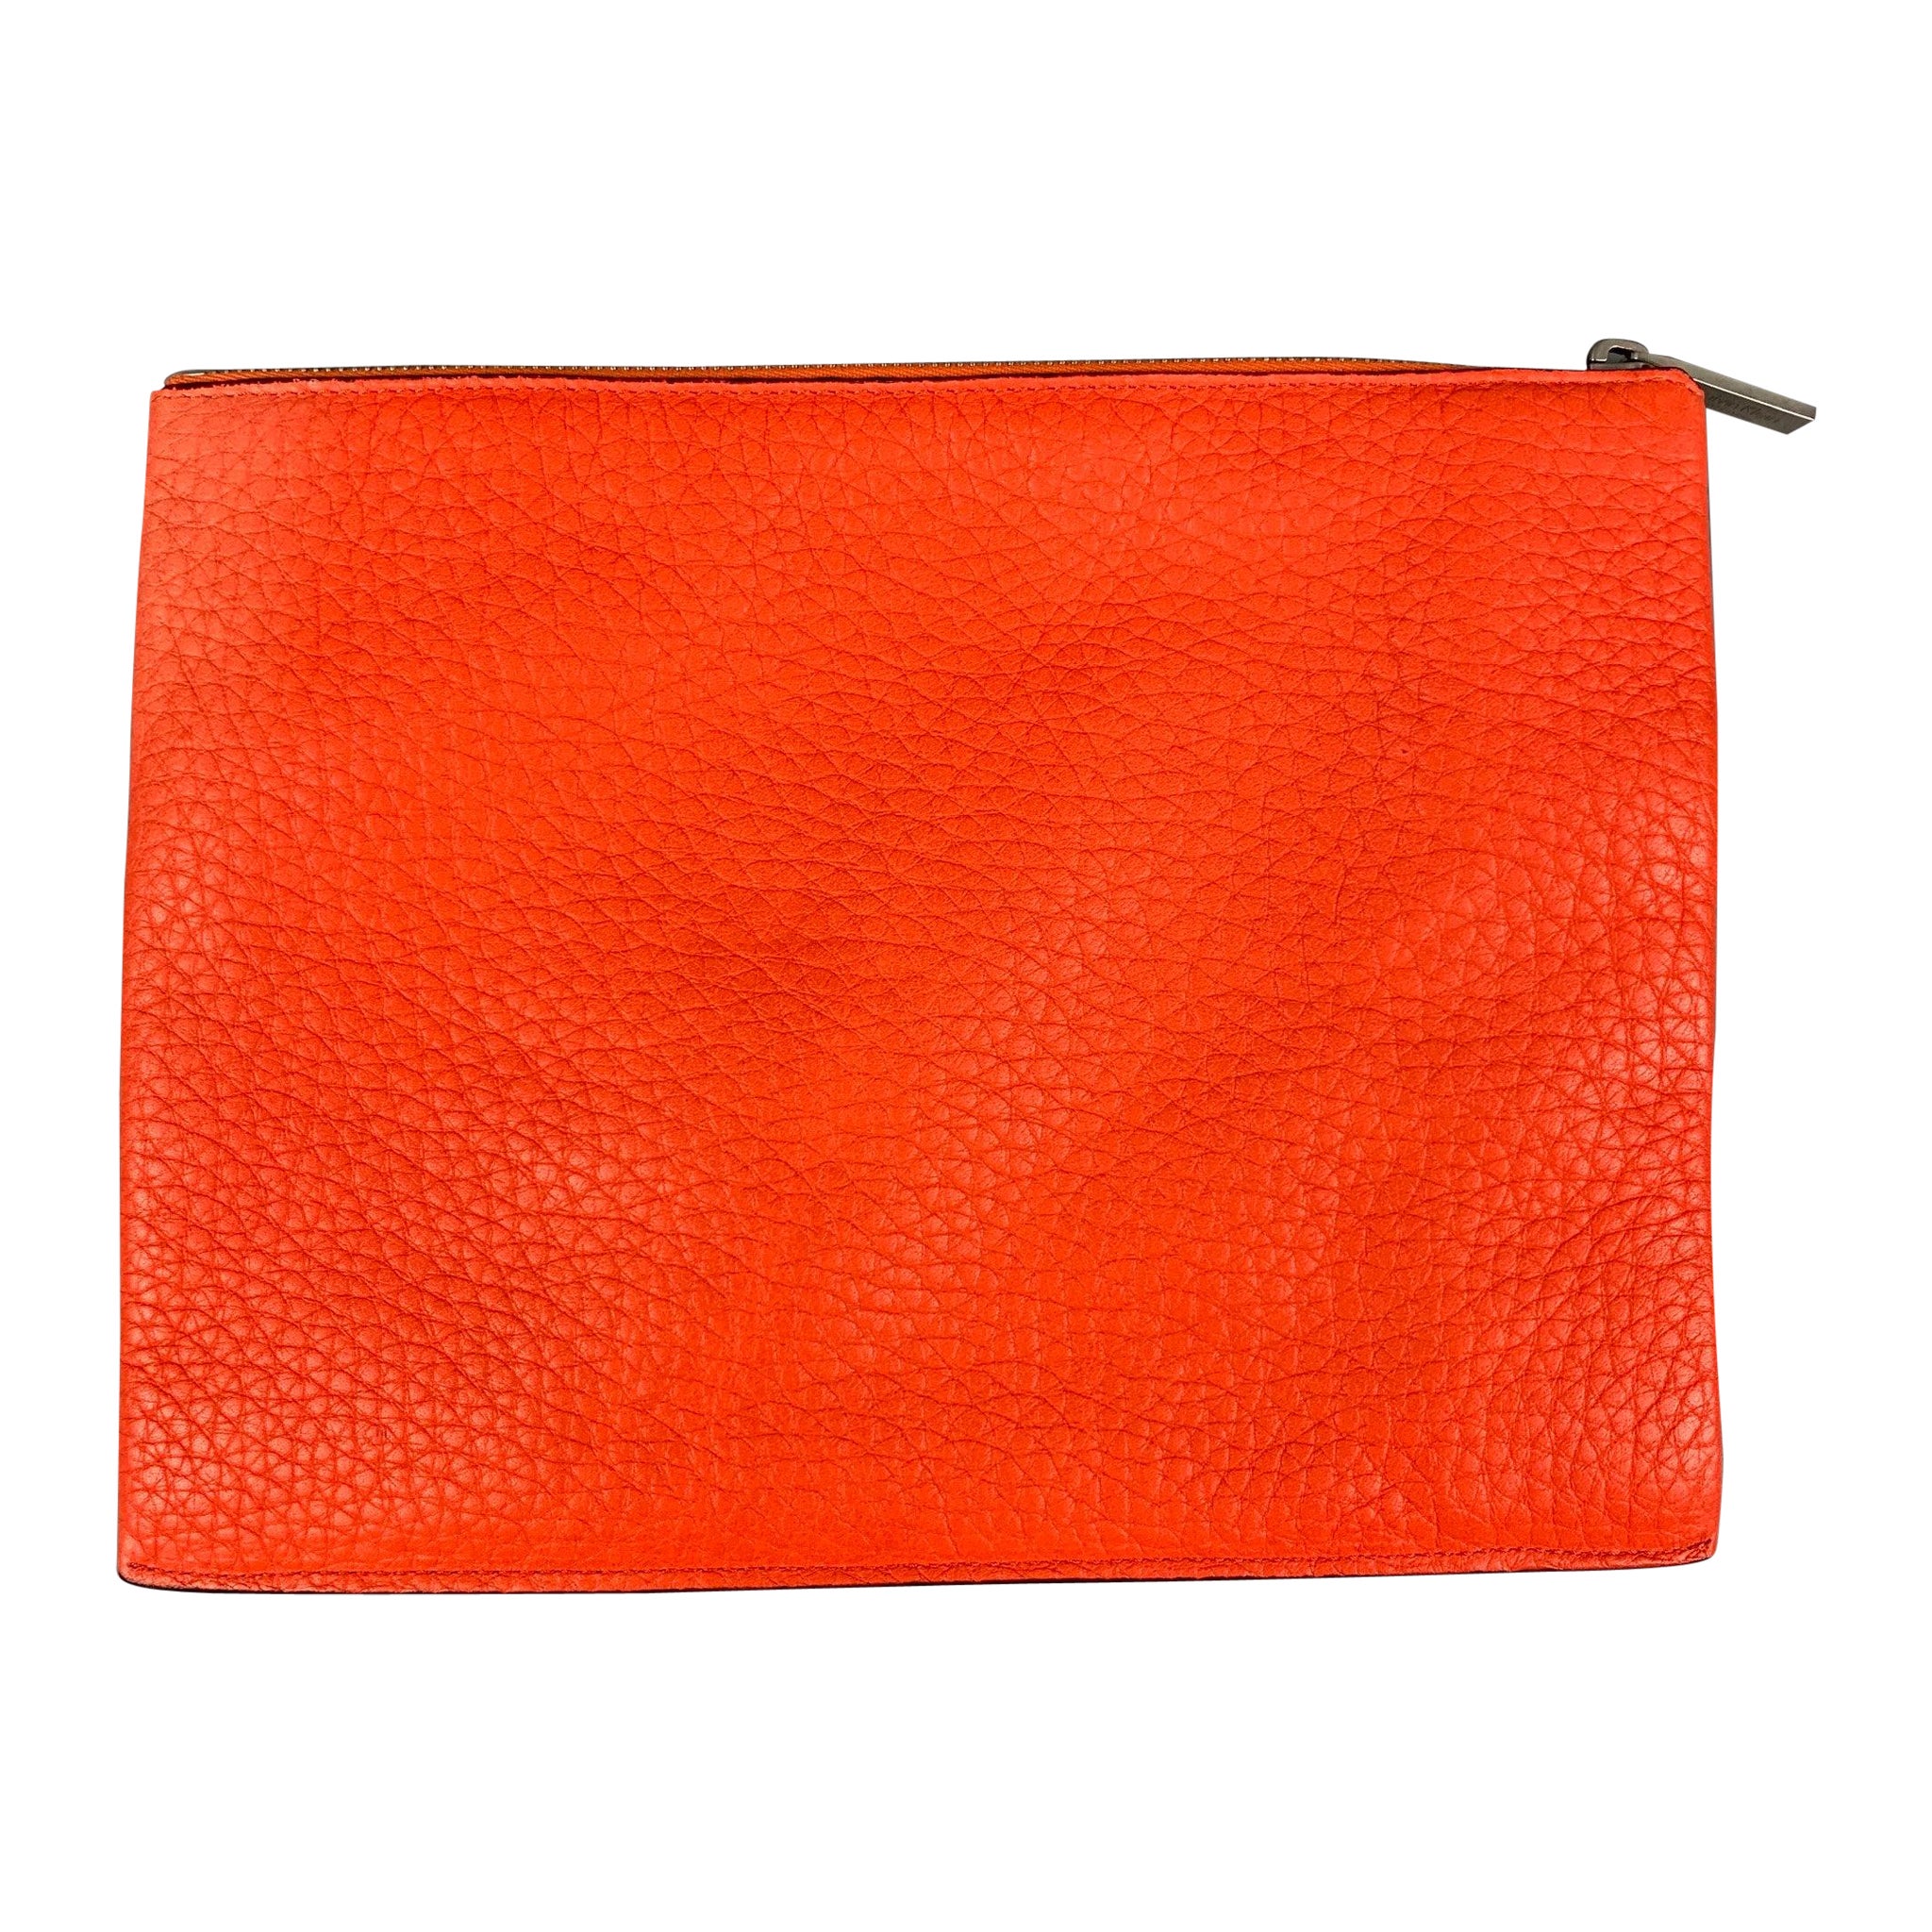 CALVIN KLEIN COLLECTION Orange Textured Leather Pouch Bag For Sale